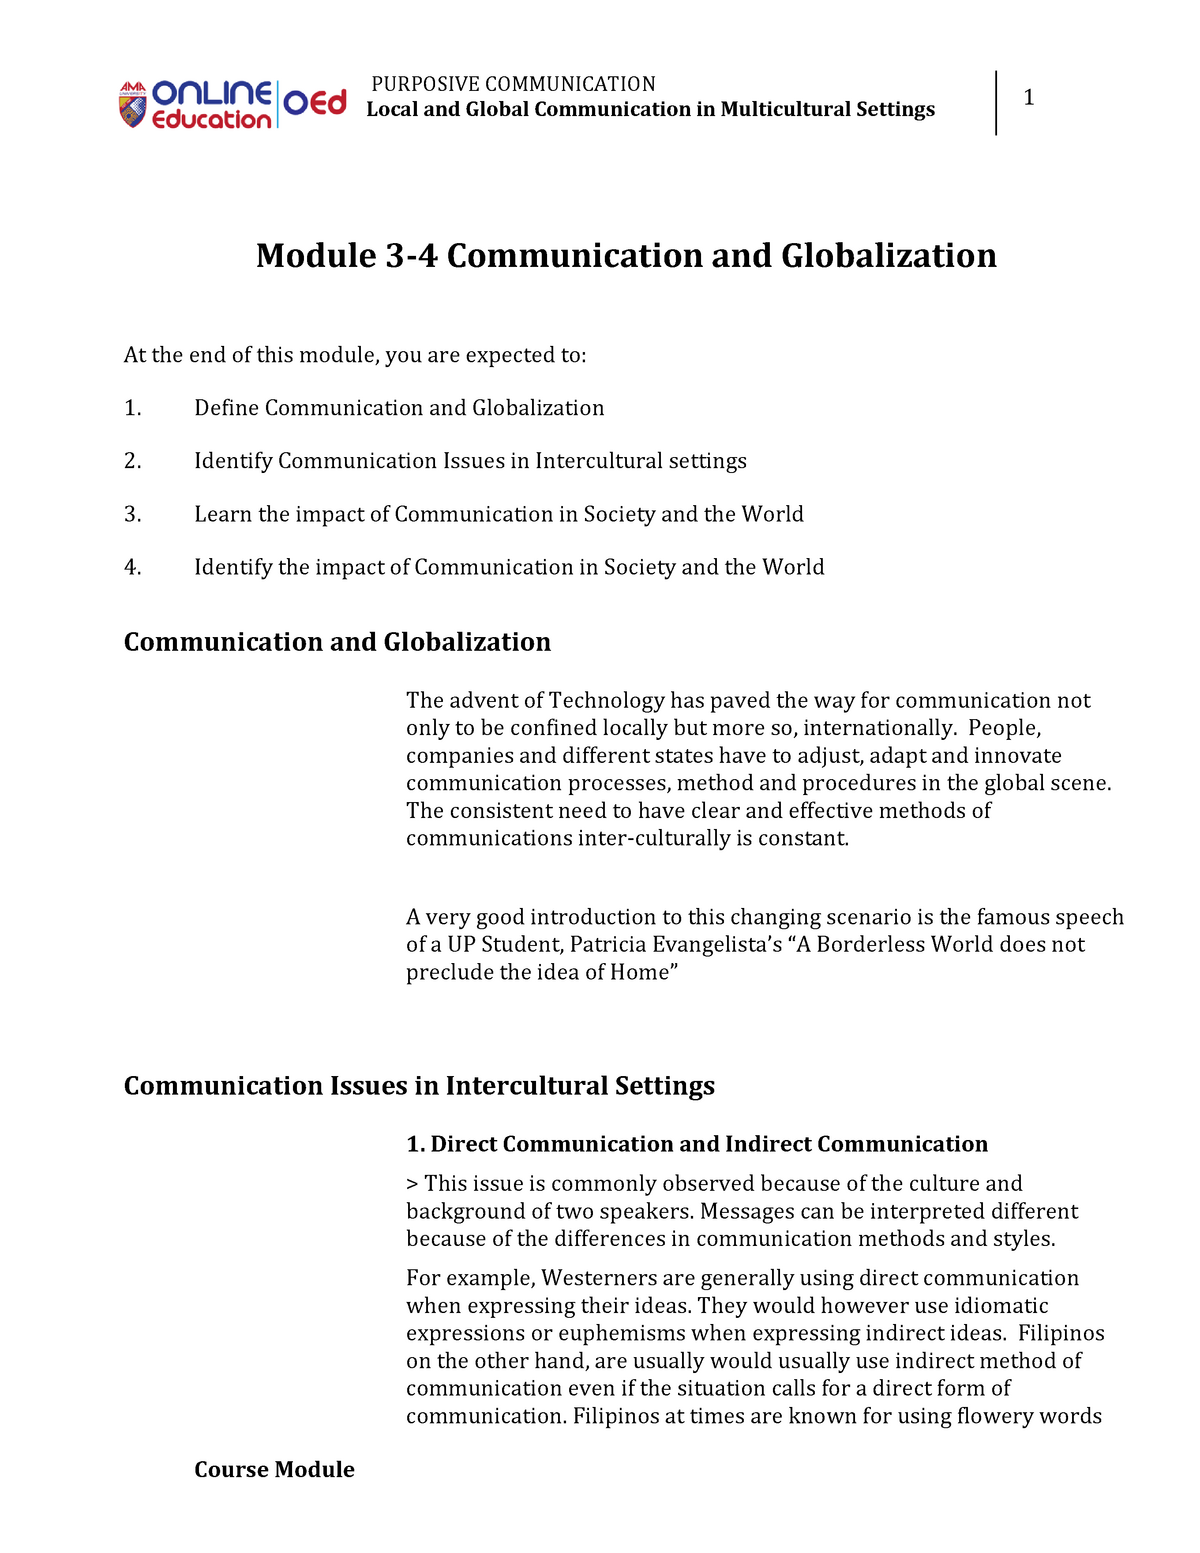 term paper about communication and globalization